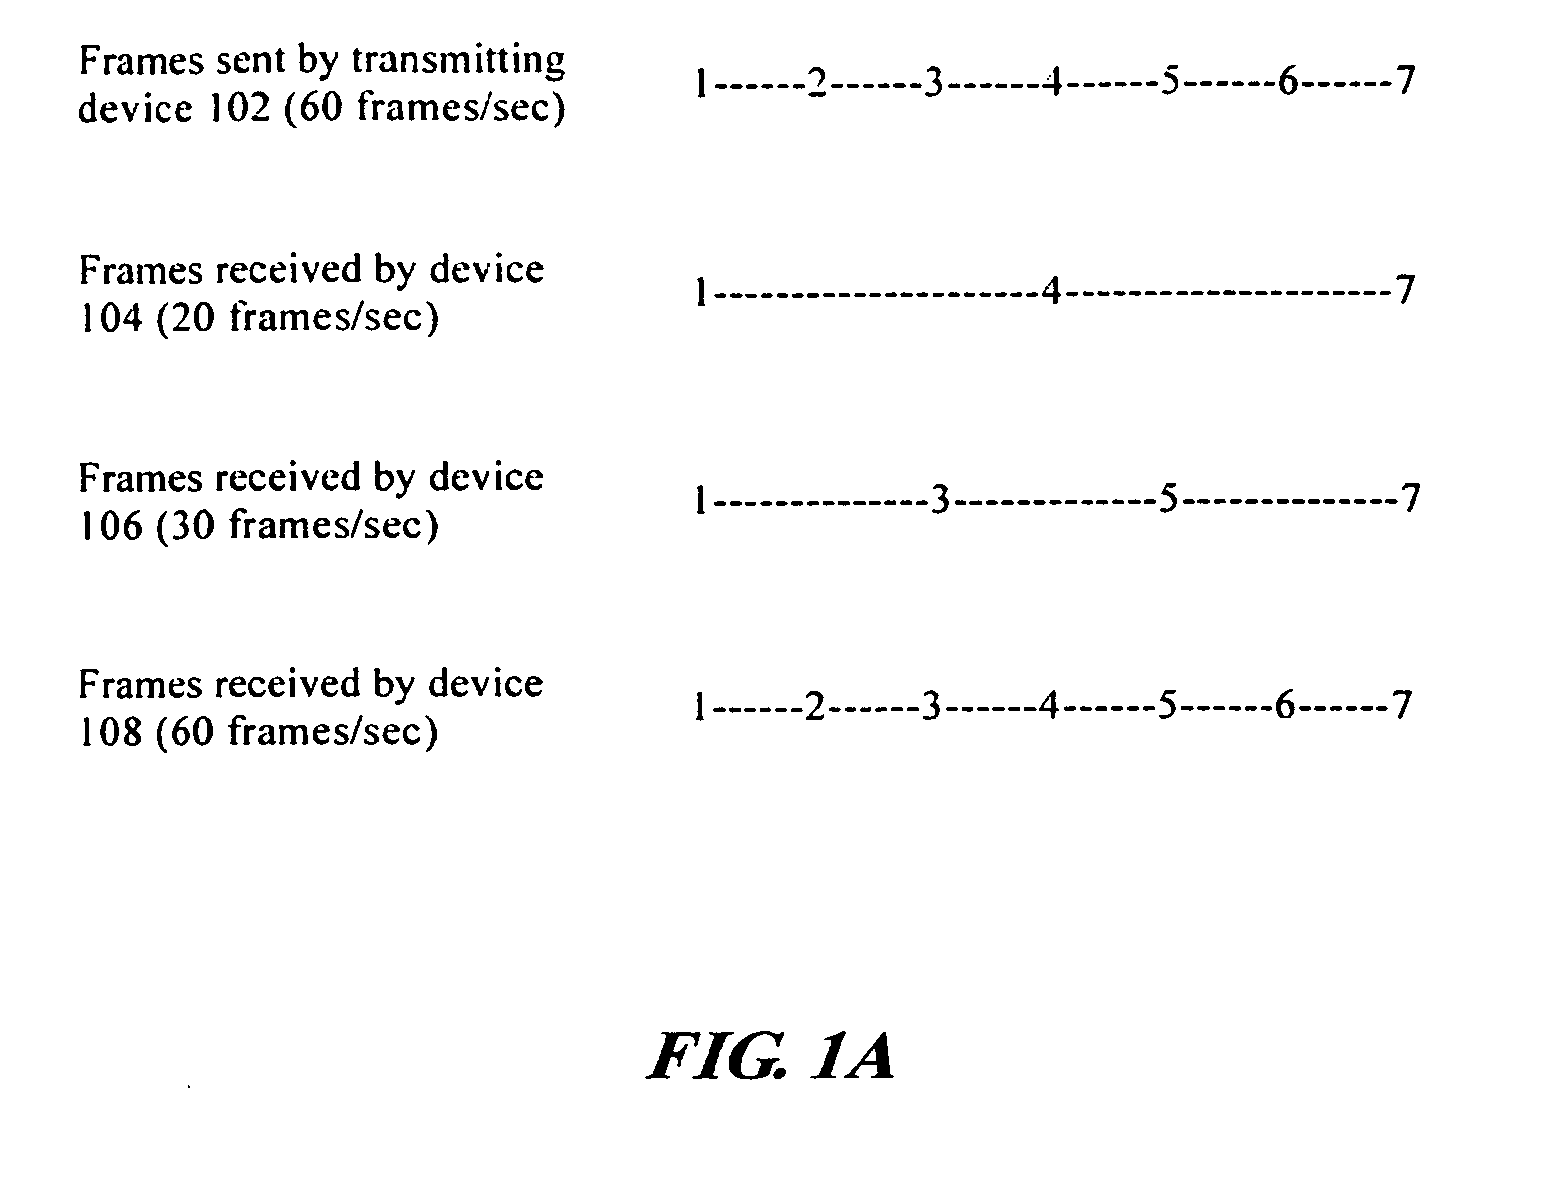 Method and system for sharing one or more graphics images between devices using profiles